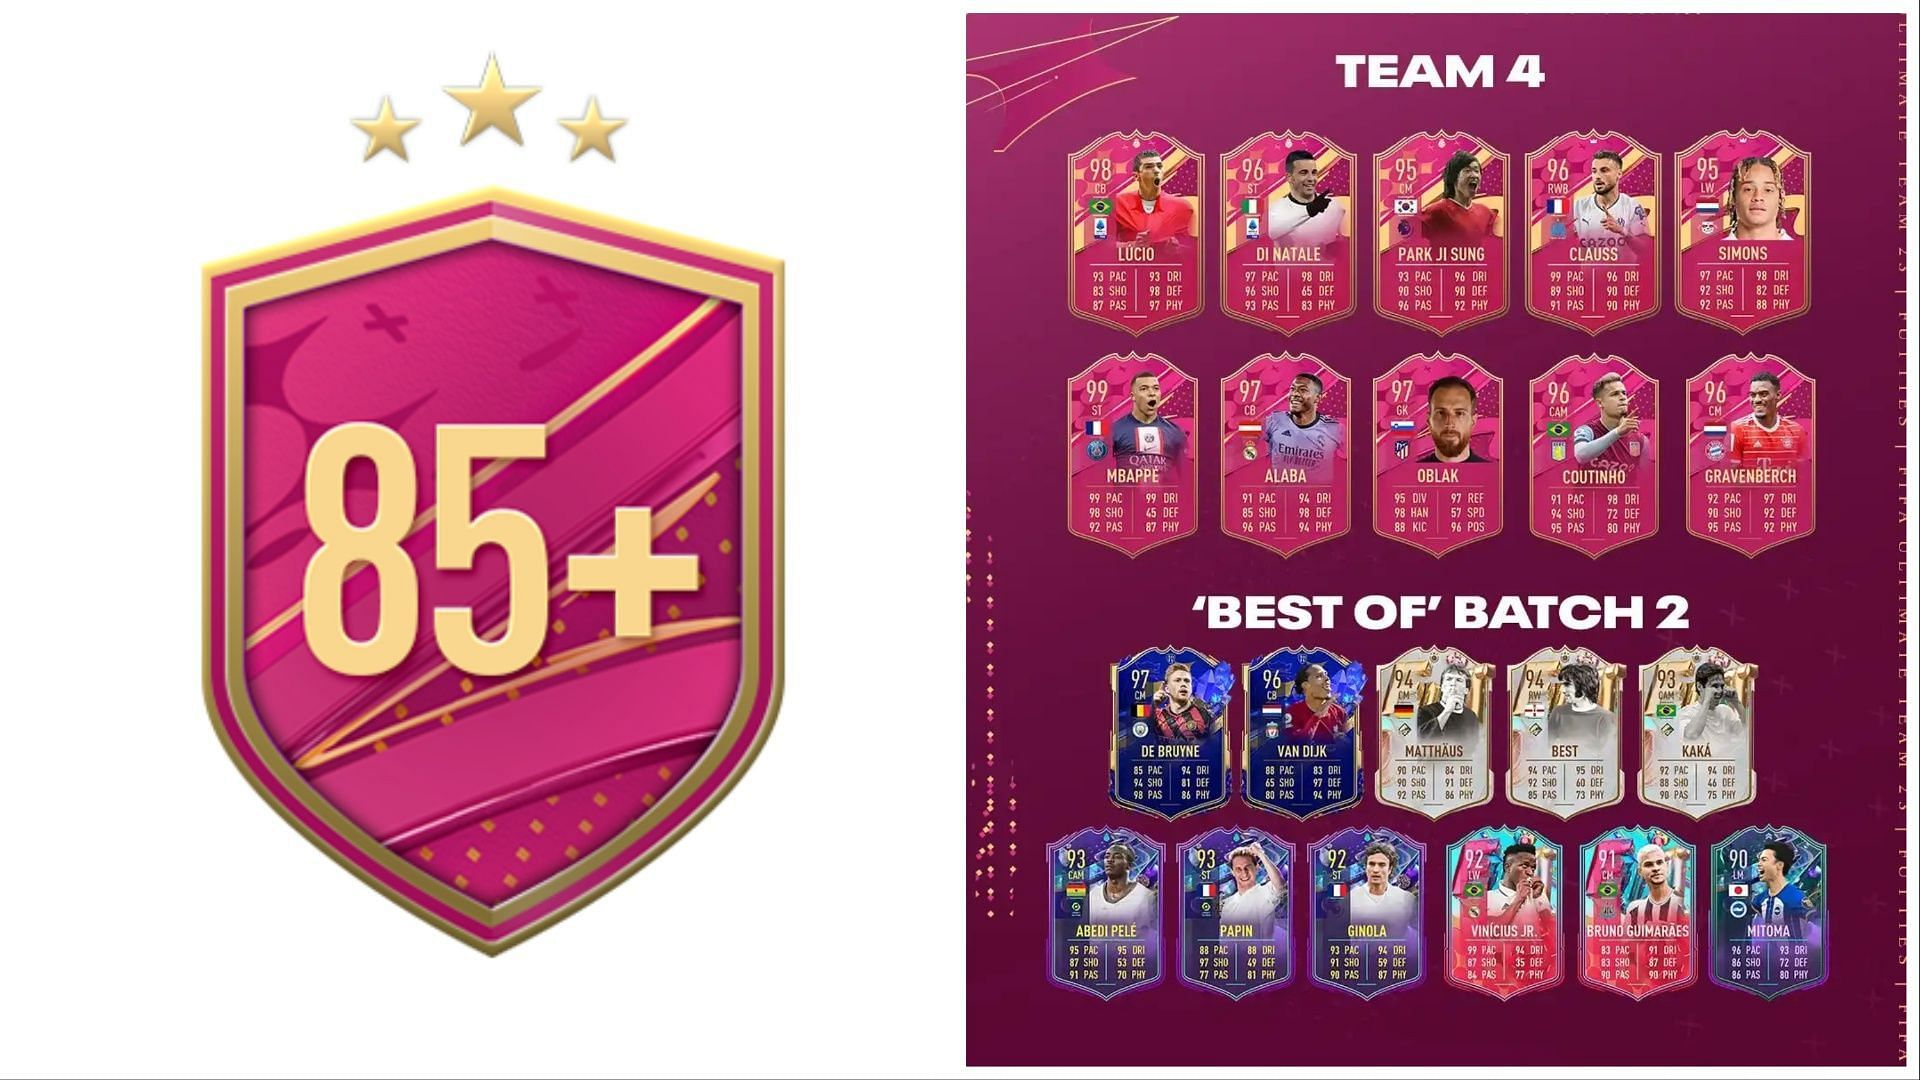 The 85+ x10 SBC has been released again (Images via EA Sports)